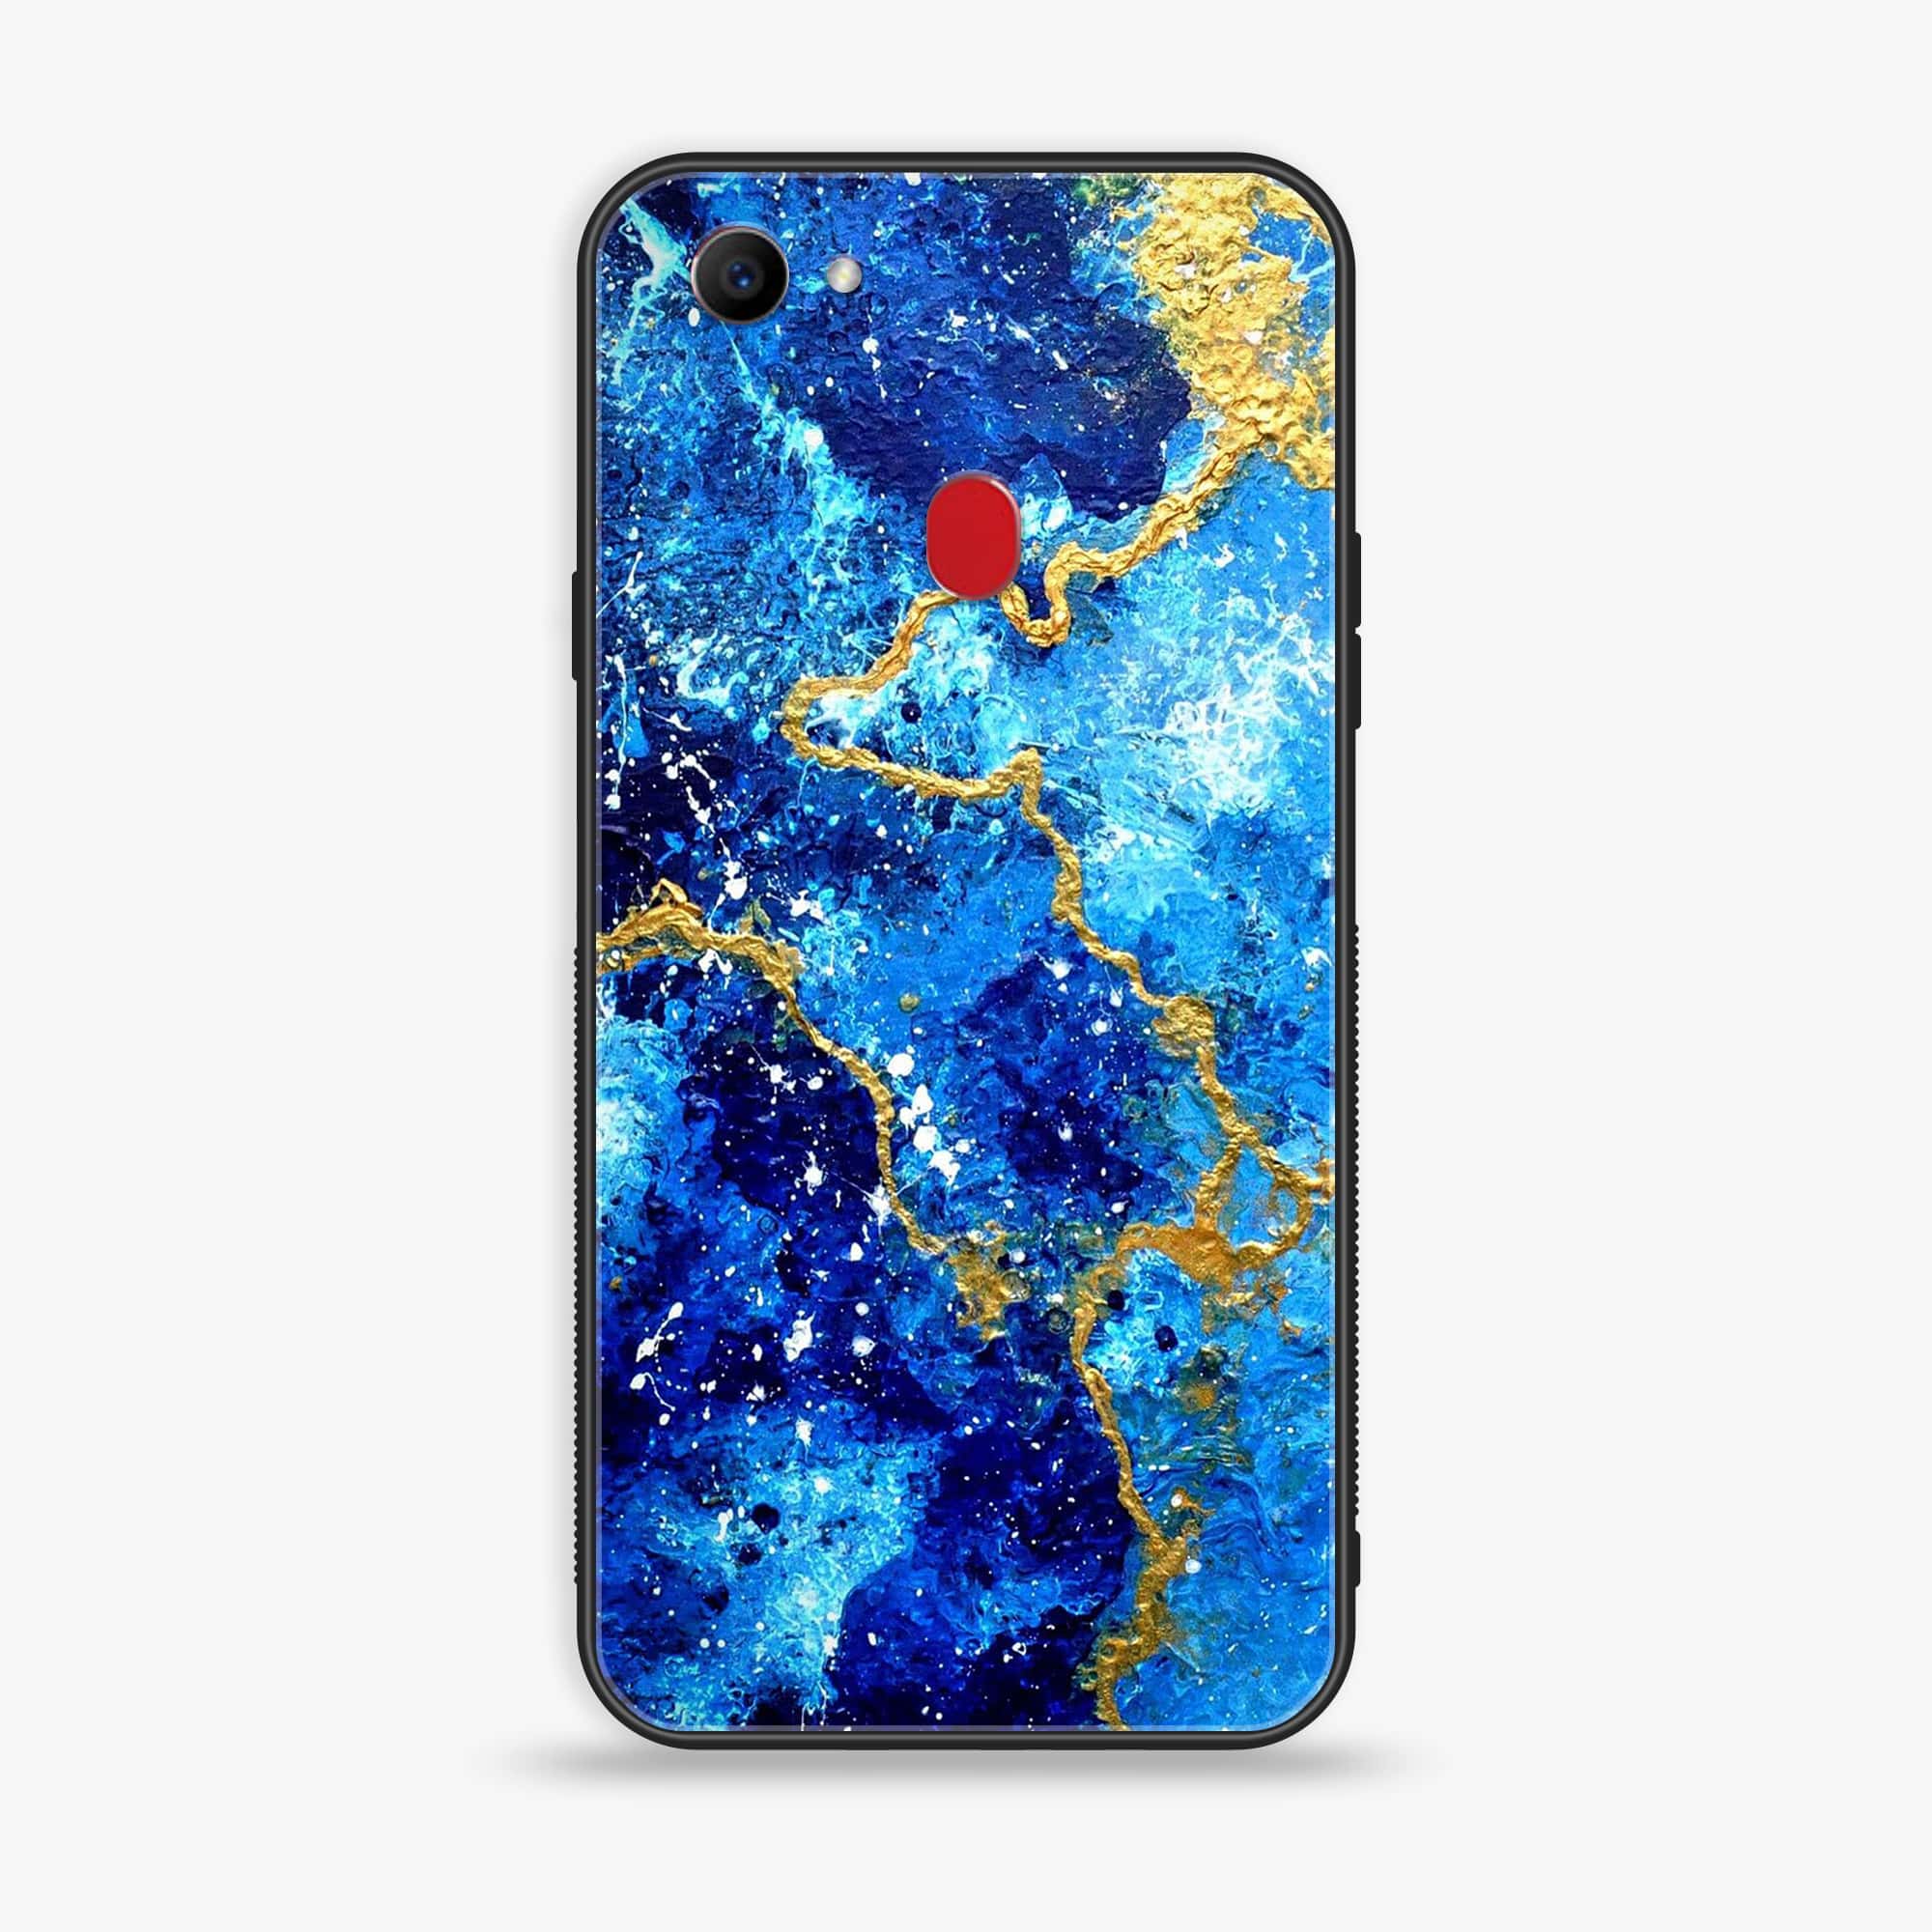 Oppo F7 - Blue Marble 2.0 Series - Premium Printed Glass soft Bumper shock Proof Case